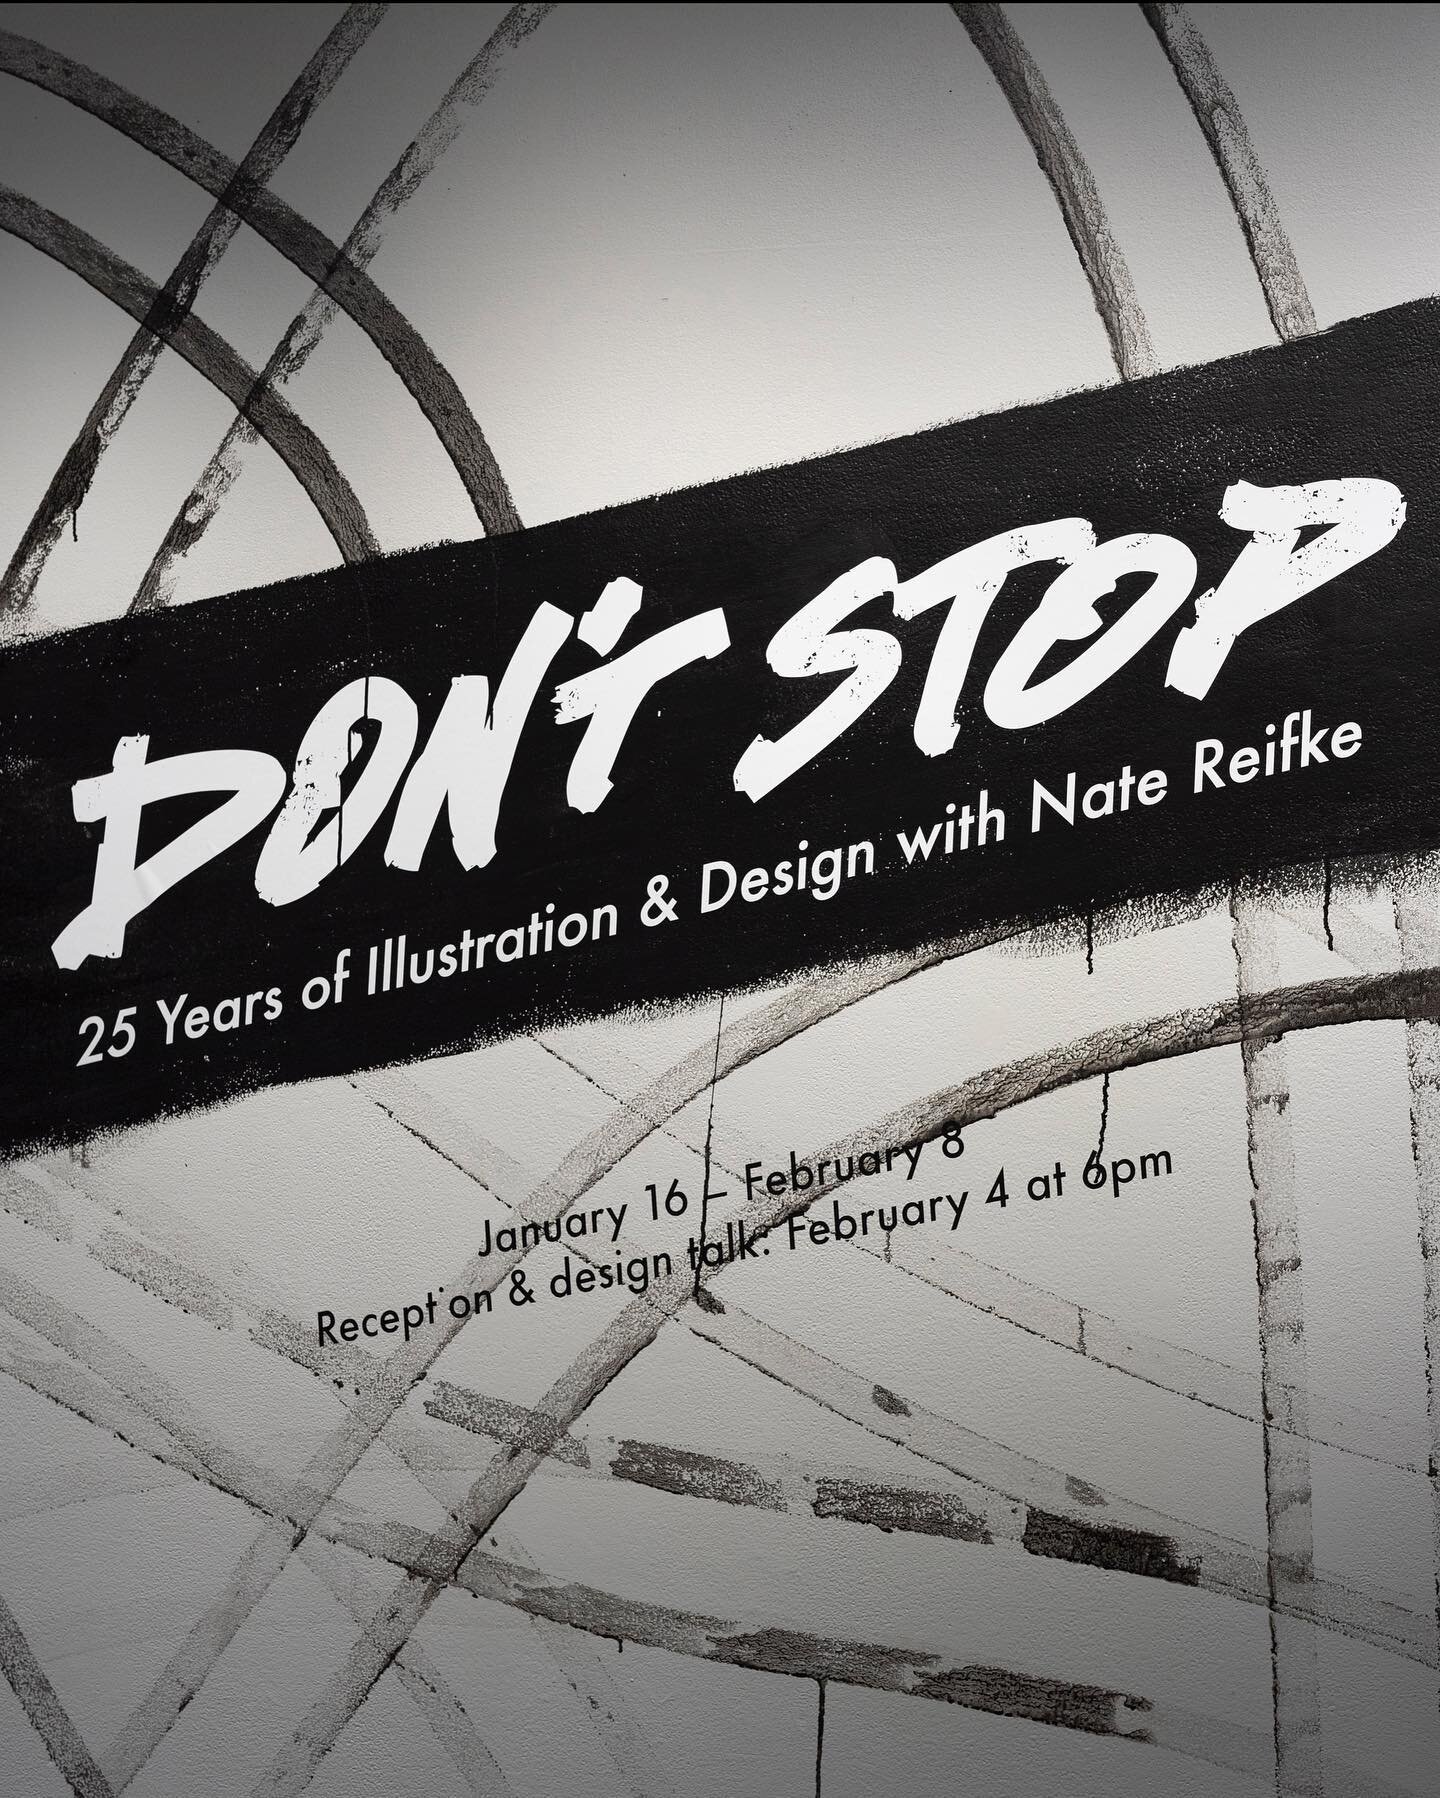 If you&rsquo;re in the Riverside area this weekend come on out to @brandstatergallery for Don&rsquo;t Stop showcasing 300+ pieces from the course of my 25 year commercial career. Reception Sunday February 4th at 6pm. I&rsquo;d love to see you. Free h